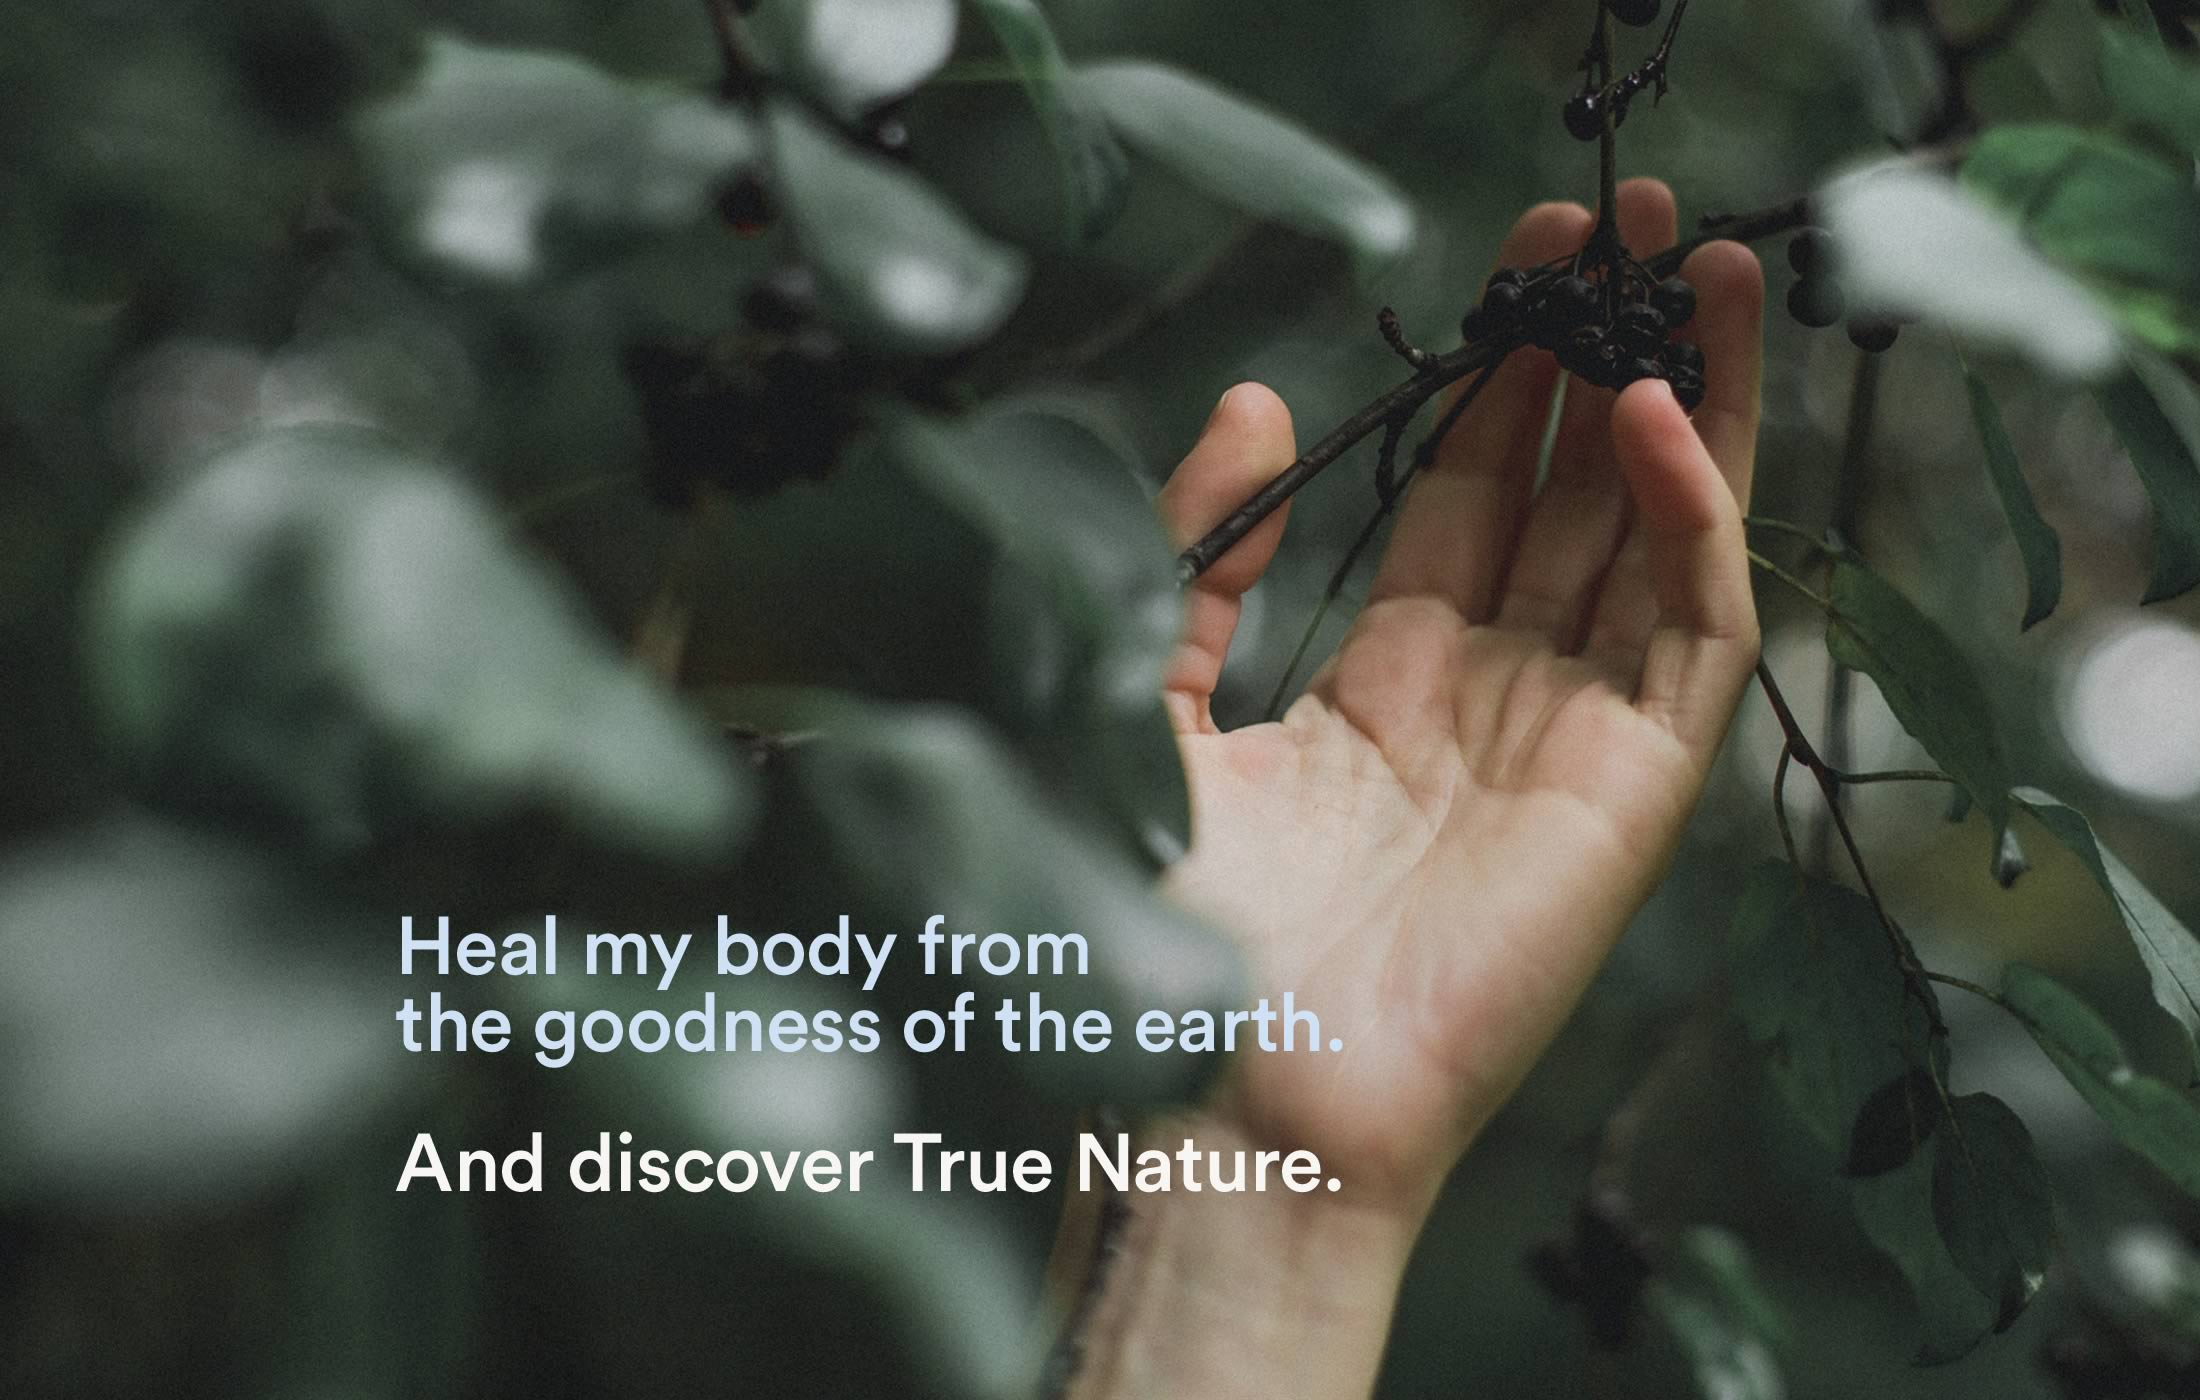 Closeup of a hand picking berries from a branch, captioned as 'Heal my body from the goodness of the earth.'